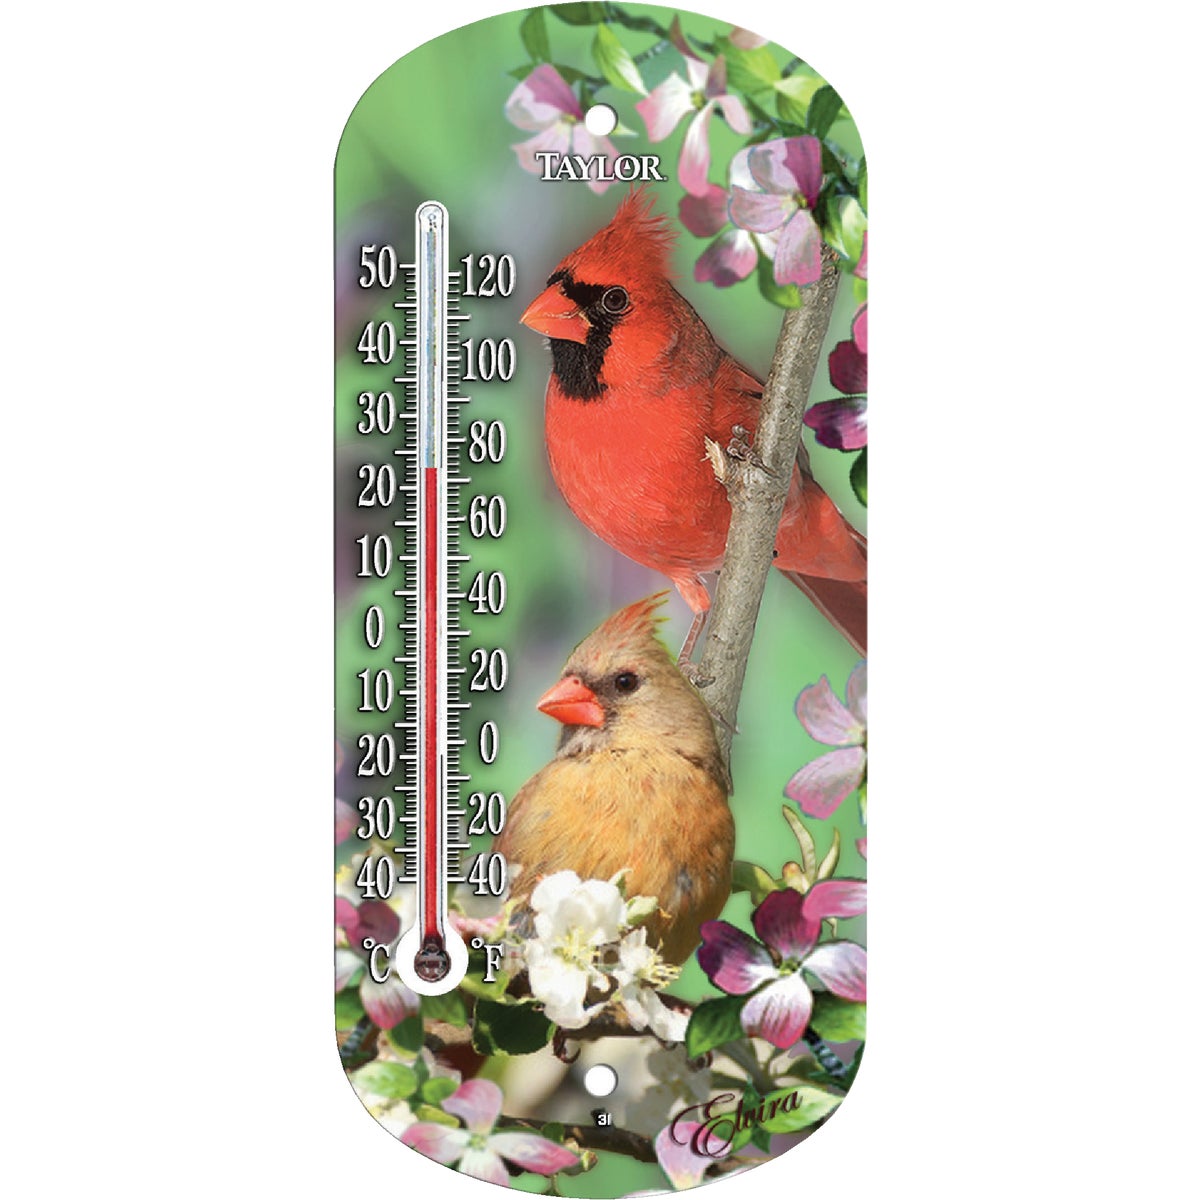 Item 600114, 8" suction cup Cardinal themed thermometer has a quality precision tube 